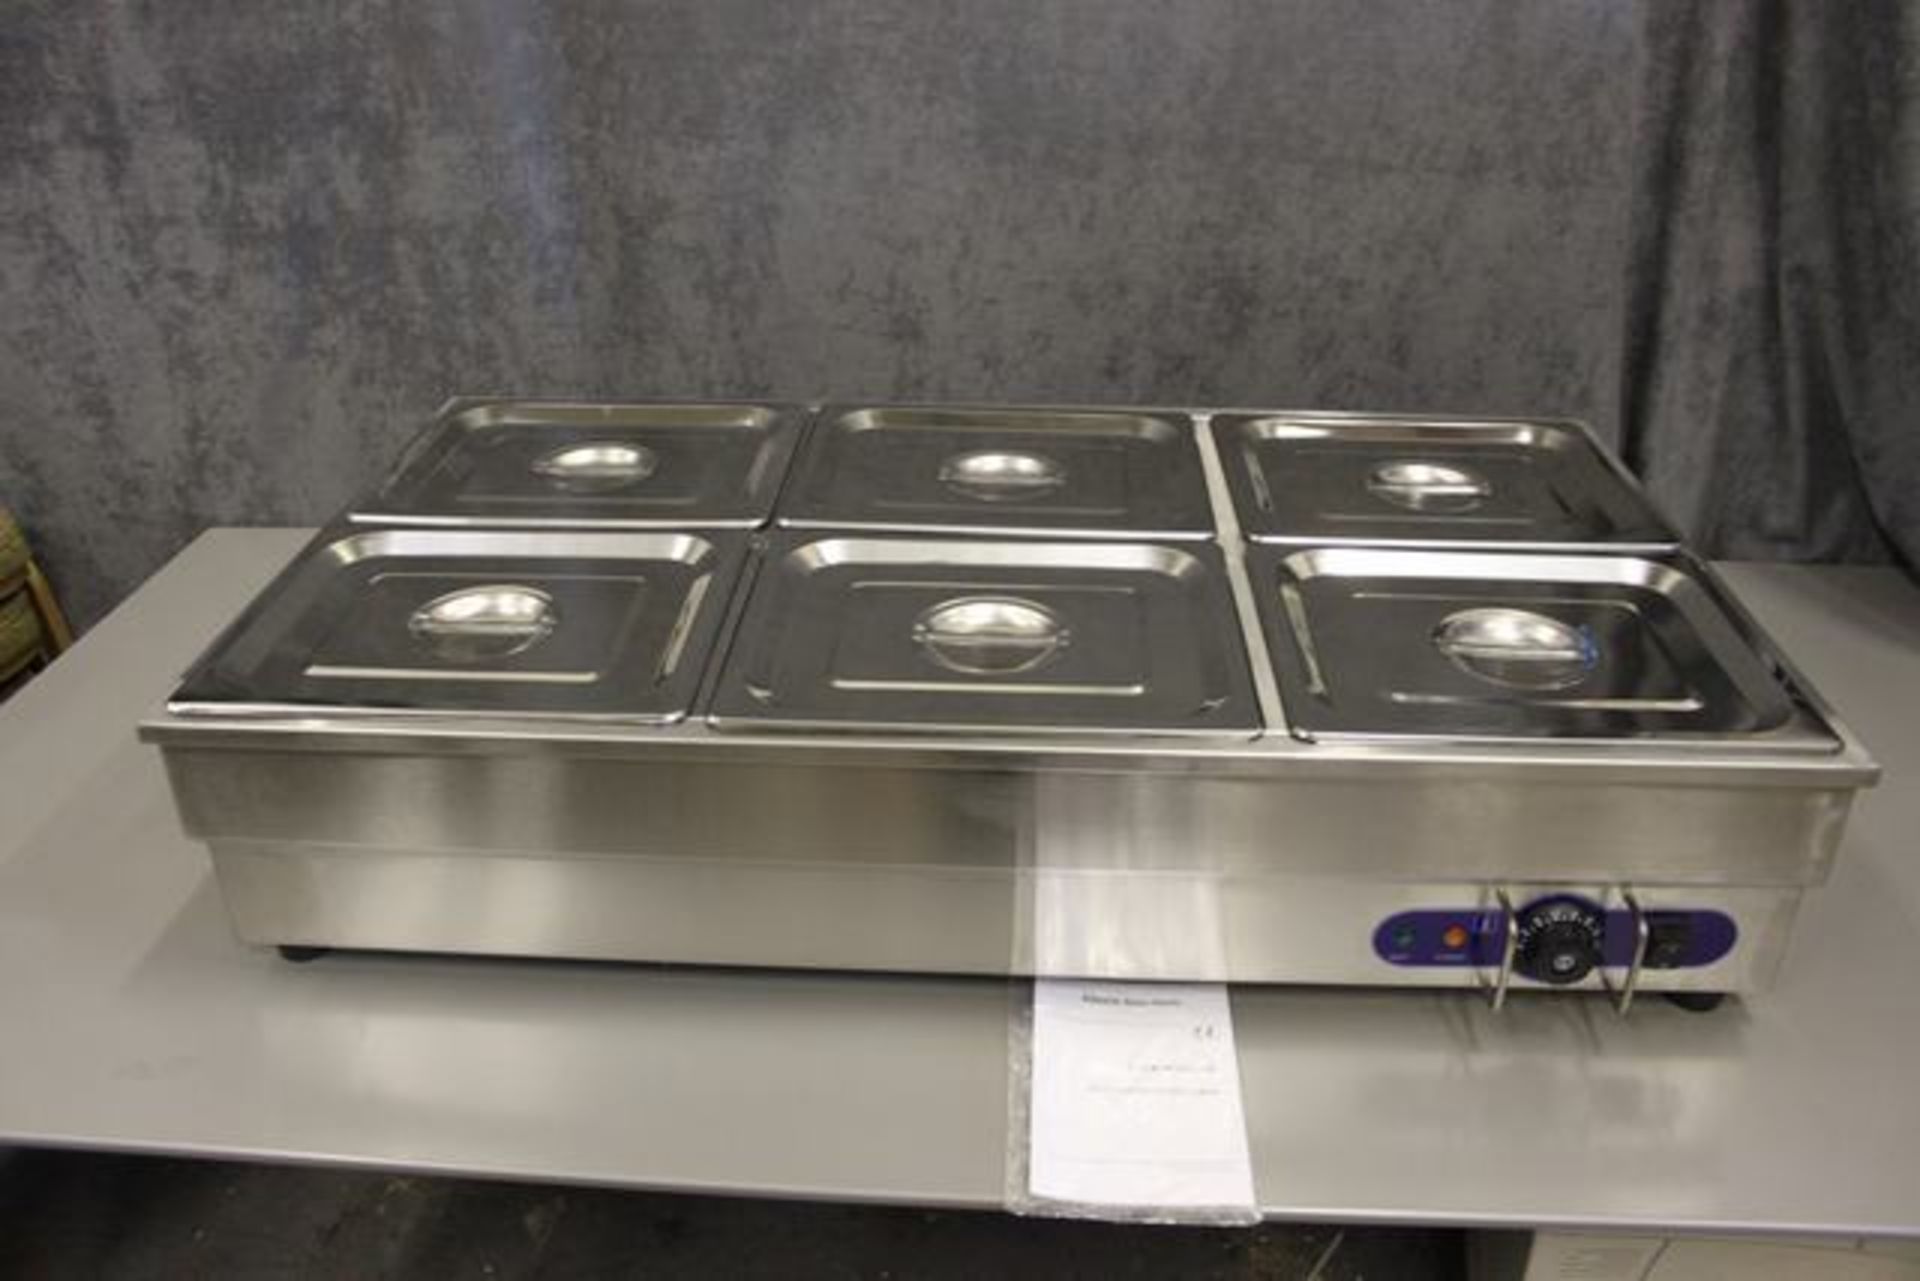 Heavy duty stainless steel Wet Heat Bain Marie counter-top with 6 x GN pans (GN pan 1/2× 4''× 6)